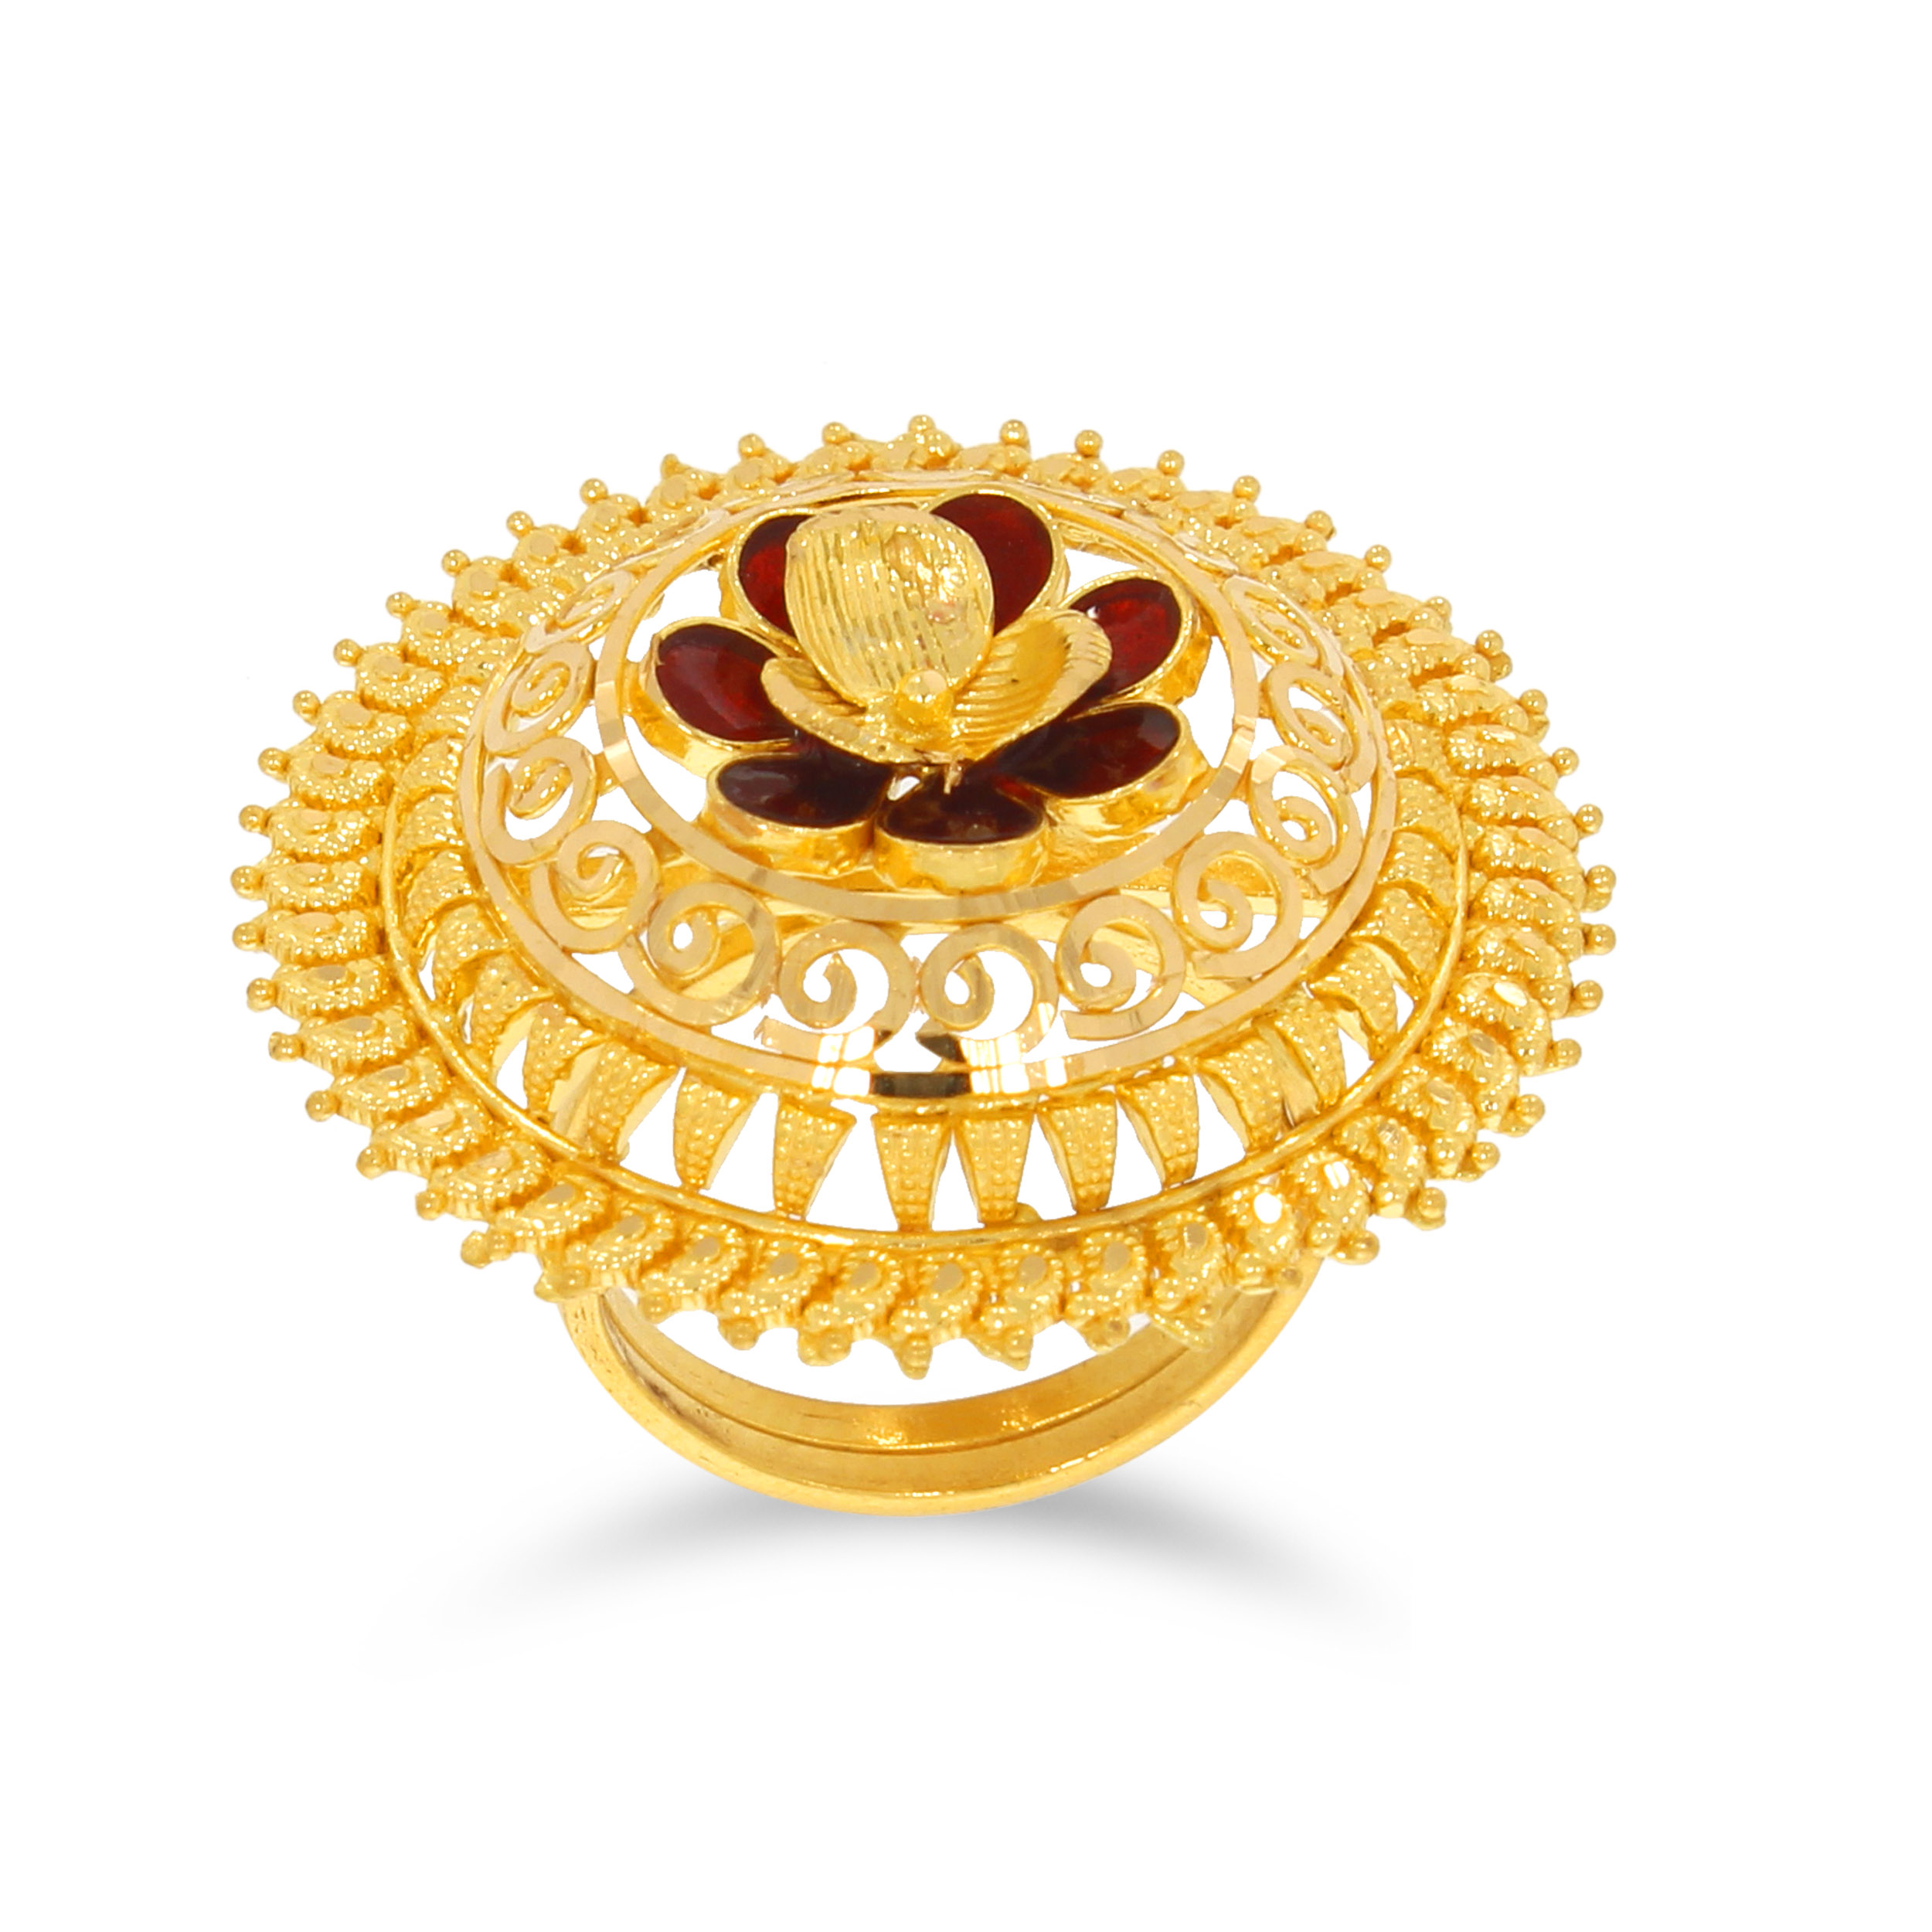 LOHI AABI JEWELS 22CT  BIS HALLMARK GOLD RING FOR  WOMEN